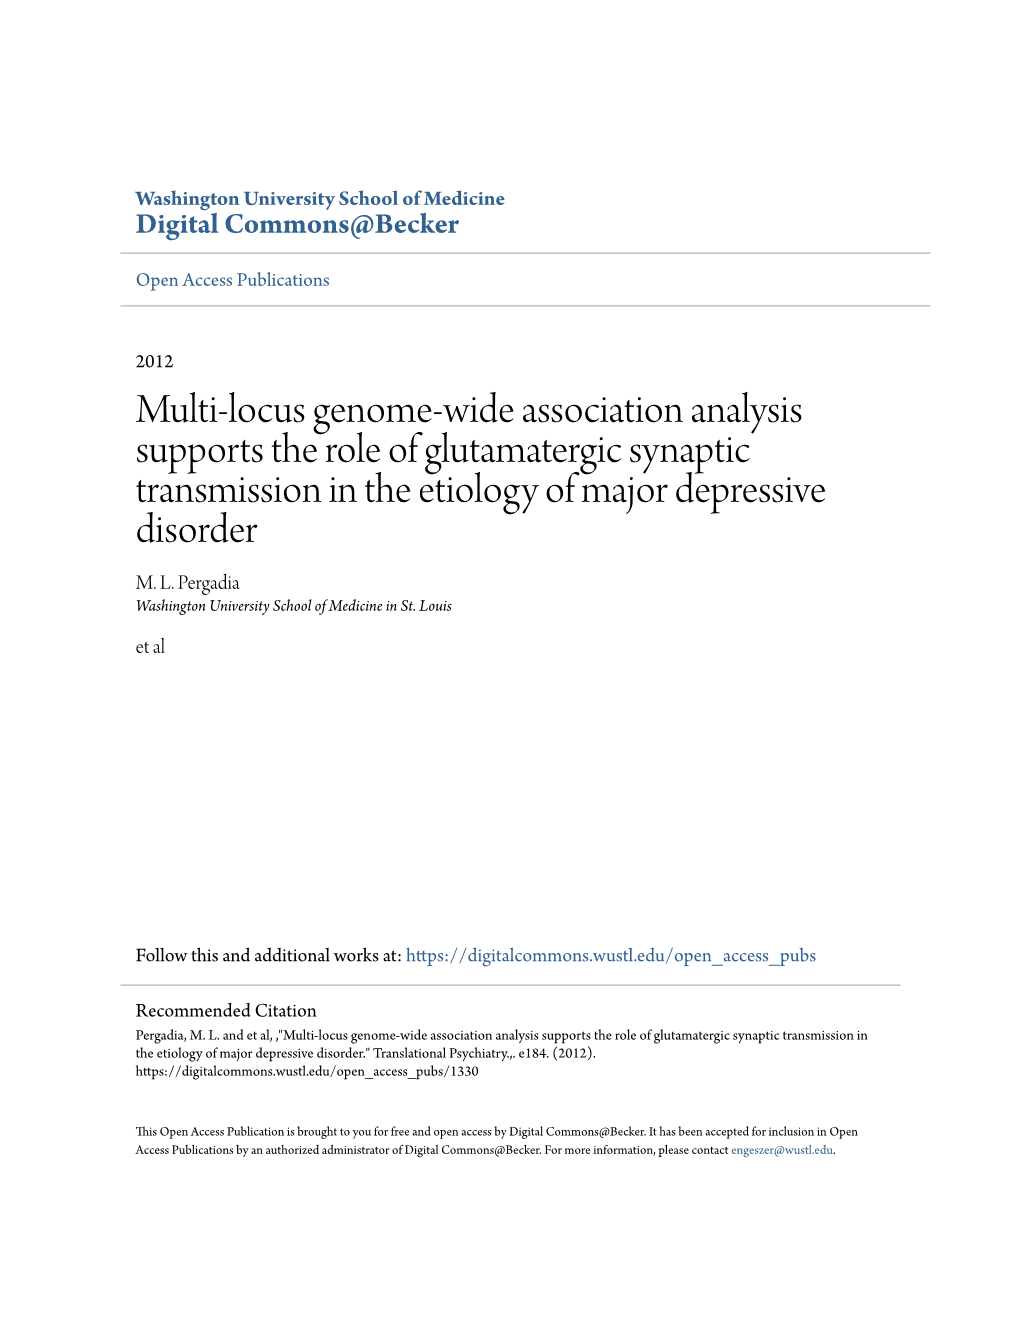 Multi-Locus Genome-Wide Association Analysis Supports the Role of Glutamatergic Synaptic Transmission in the Etiology of Major Depressive Disorder M